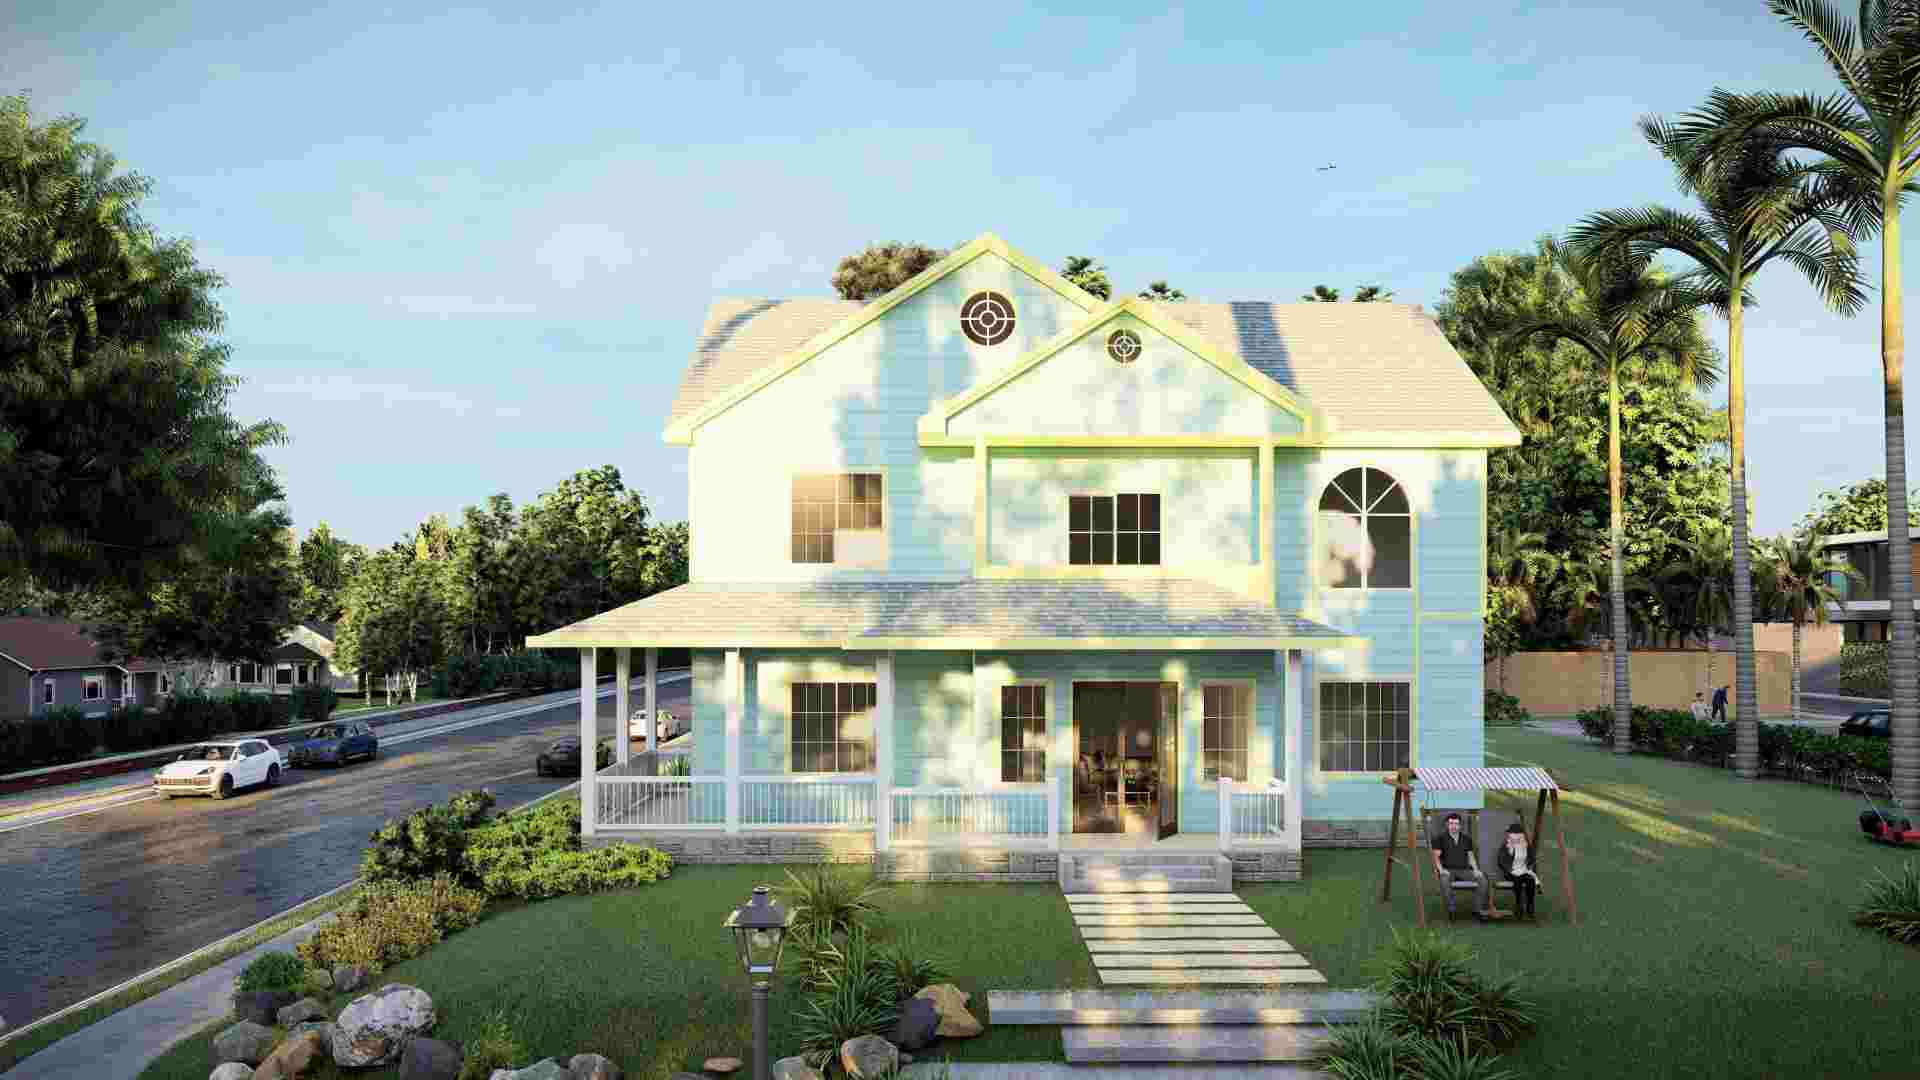 Luxury Beautiful Steel Villas High Quality Assembly Light Steel Frame Houses For Sale - Qb23